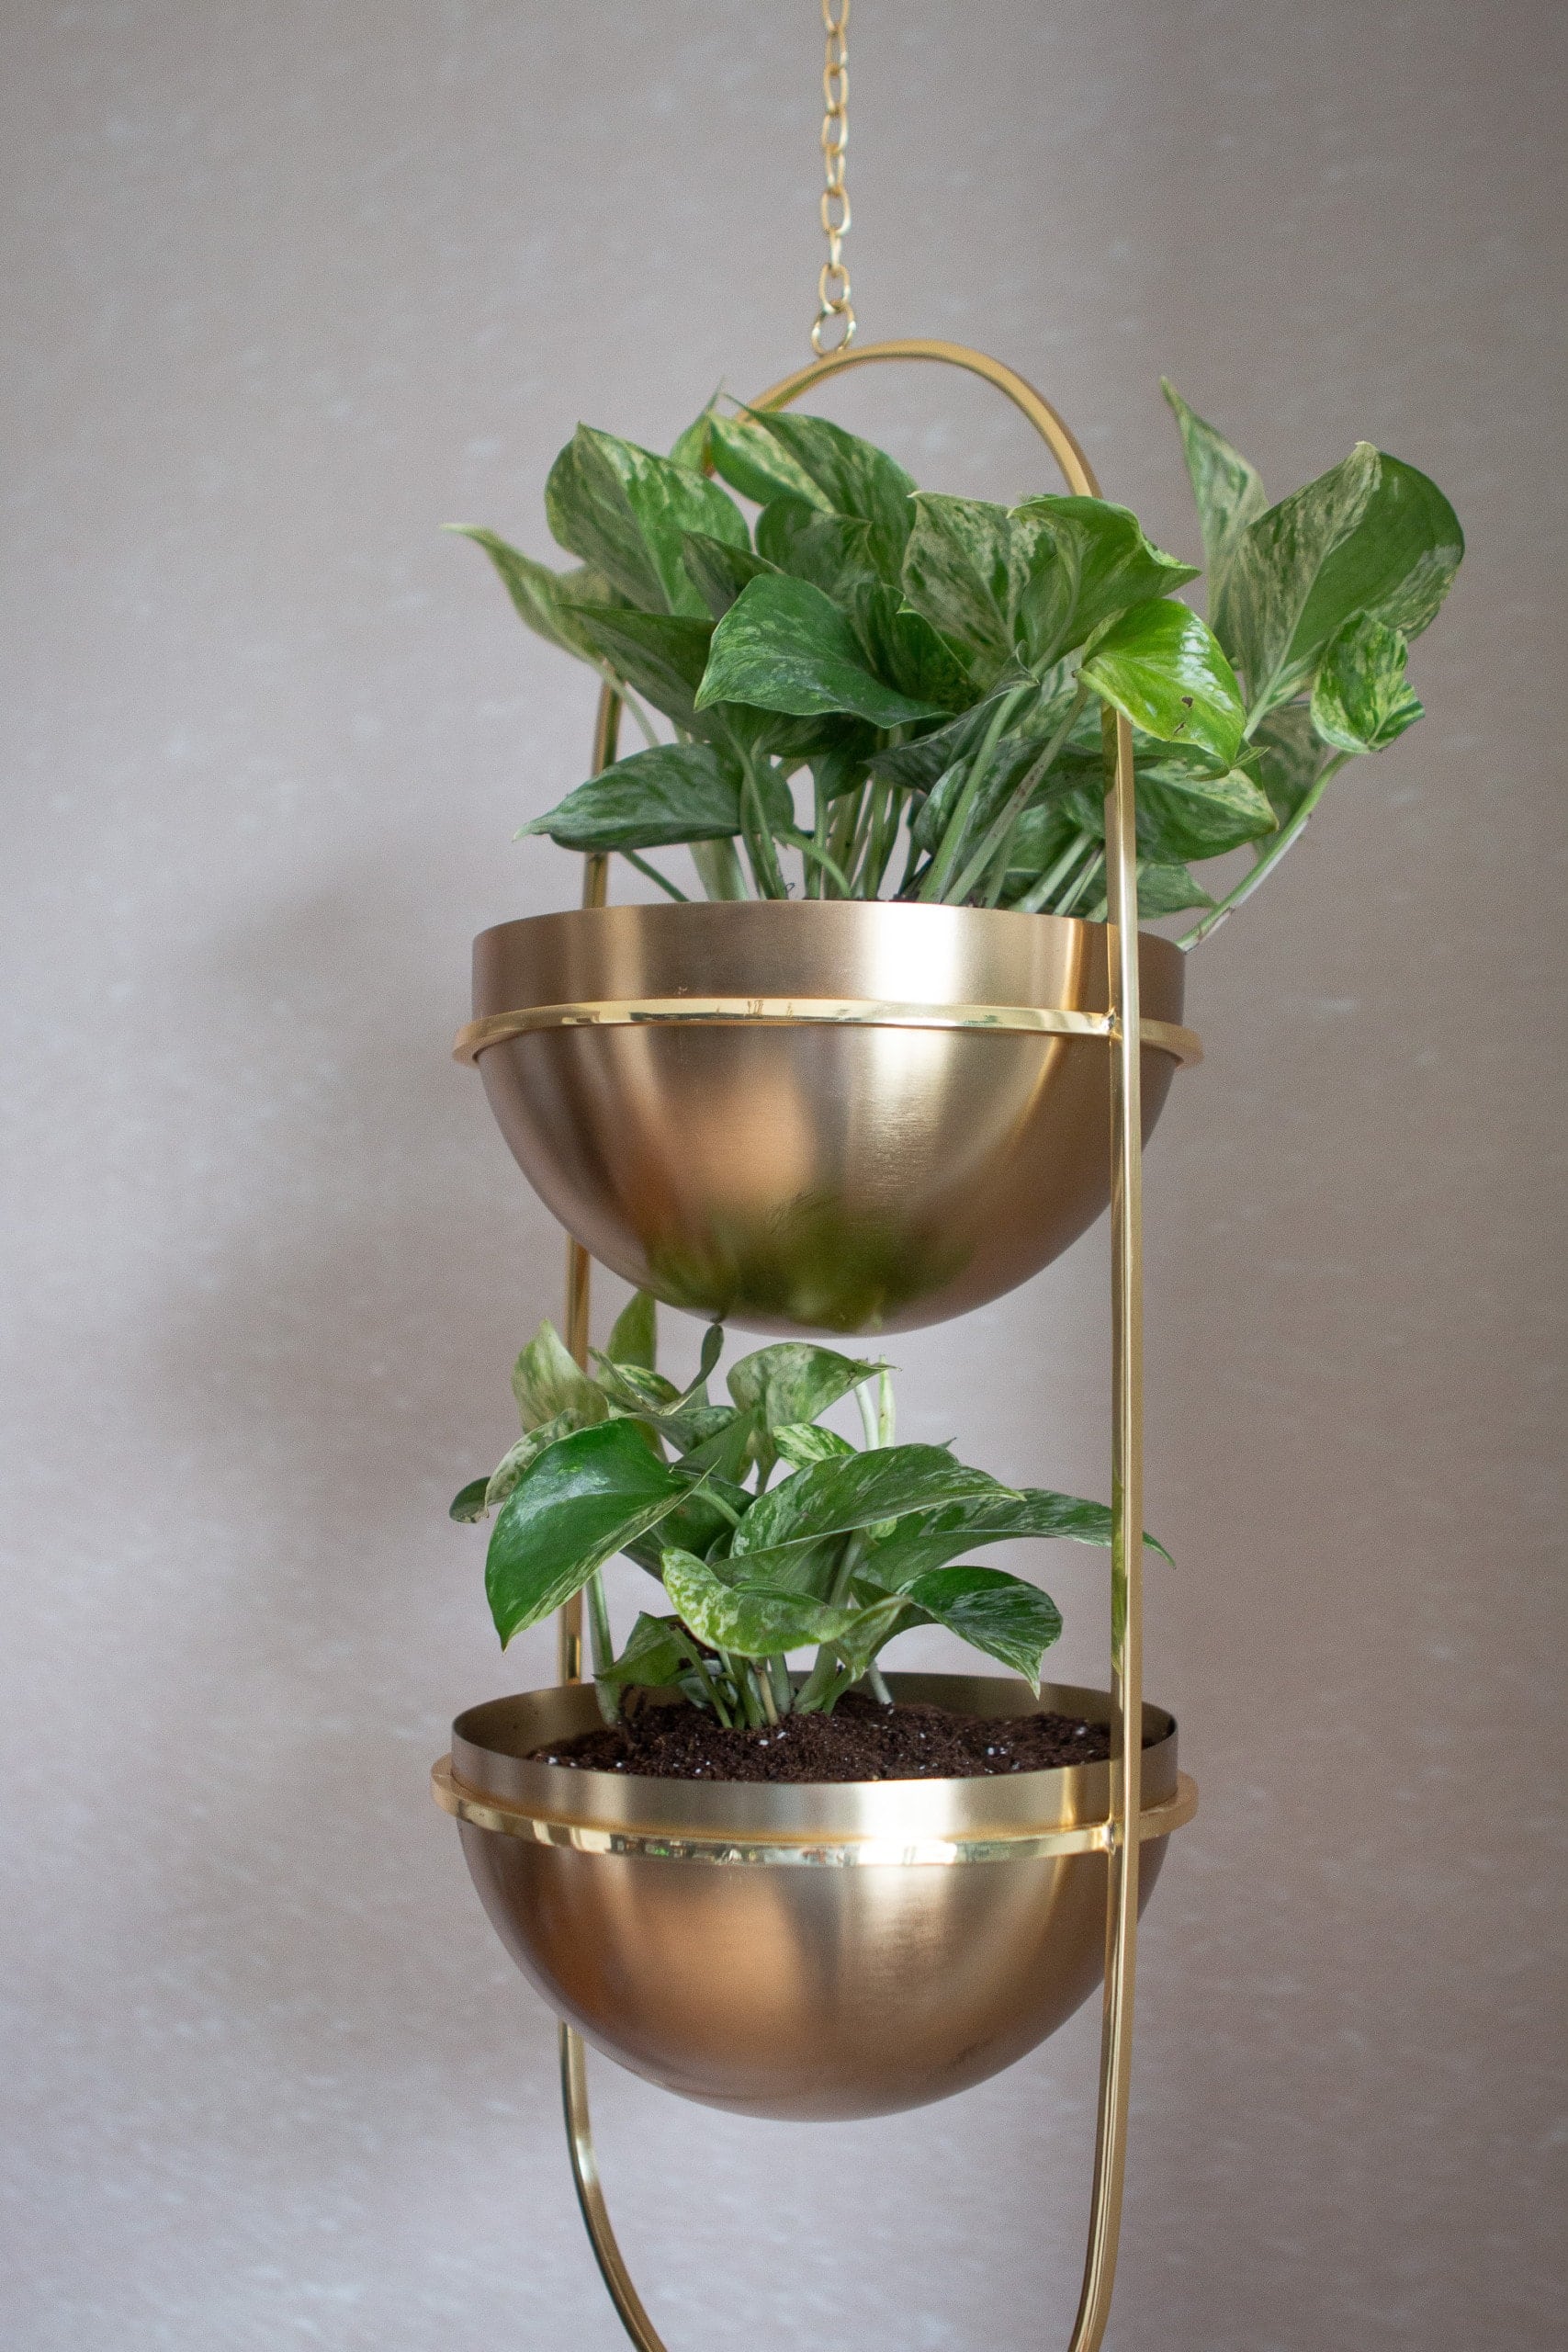 Hang your pothos plants in the hanging planter